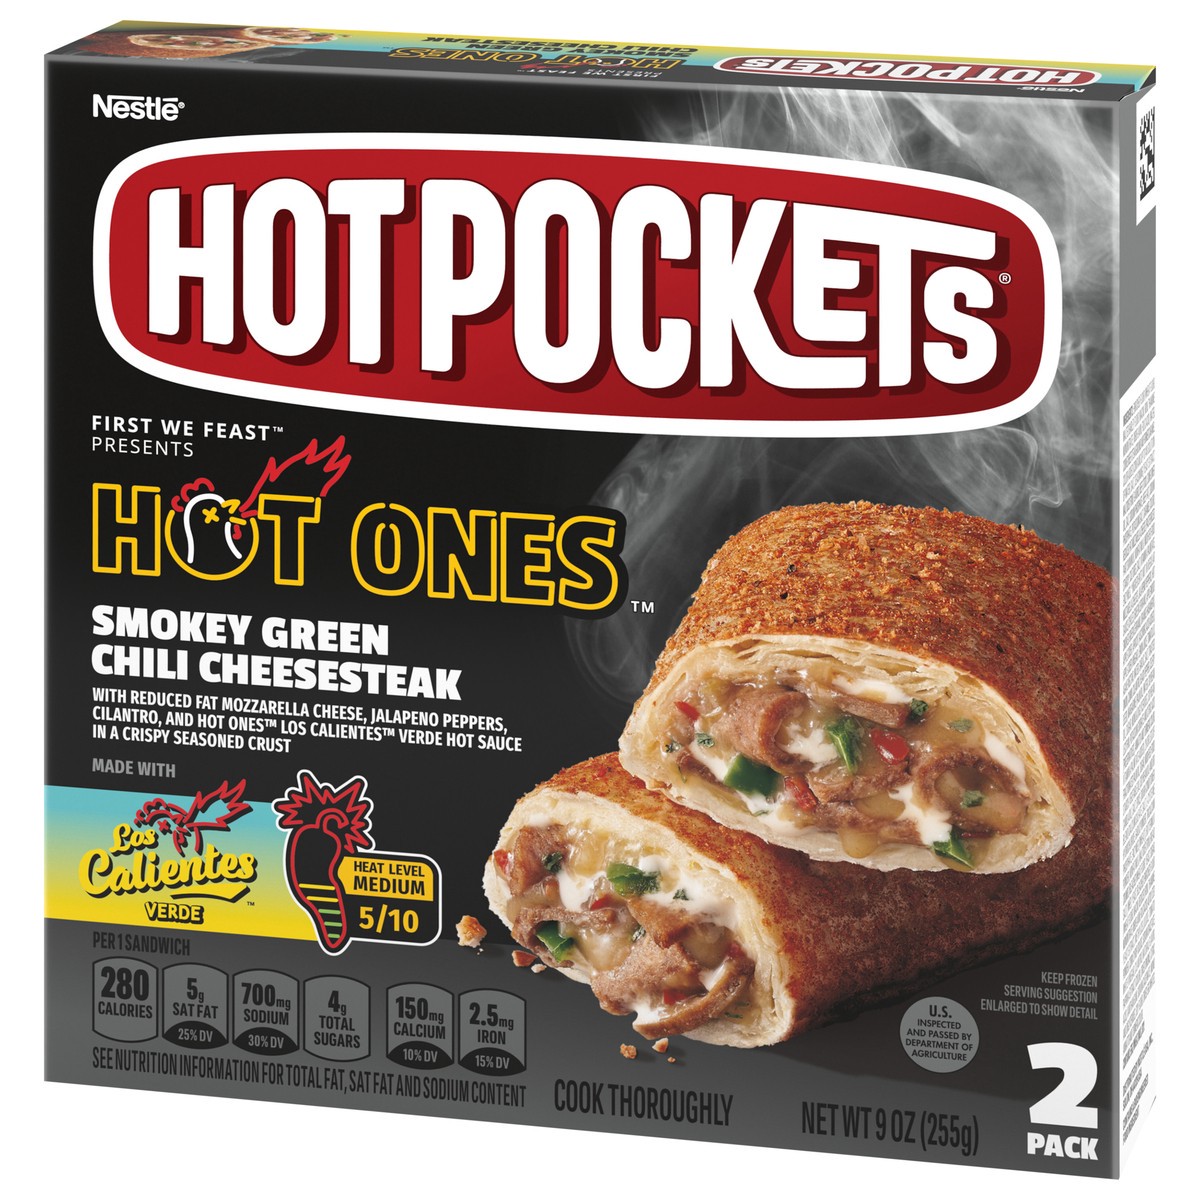 slide 3 of 9, Hot Pockets Hot Ones Smokey Green Chili Cheesesteak Frozen Snacks in a Crispy Buttery Crust, Steak and Cheese Sandwiches Made with Real Cheddar Cheese, 2 Count Frozen Sandwiches, 9 oz